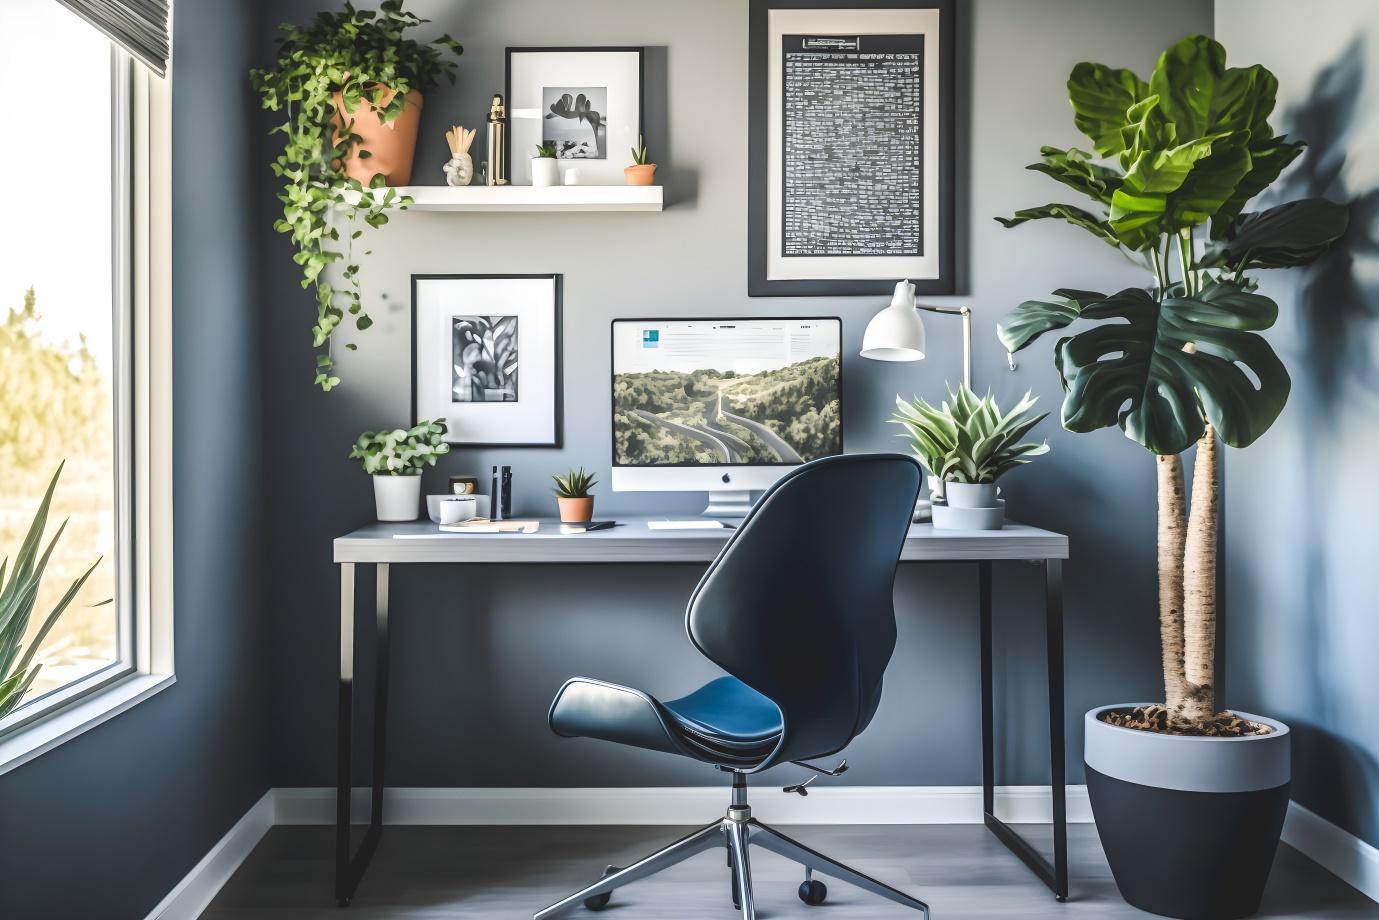 Home office design with indoor plant and desk plant.